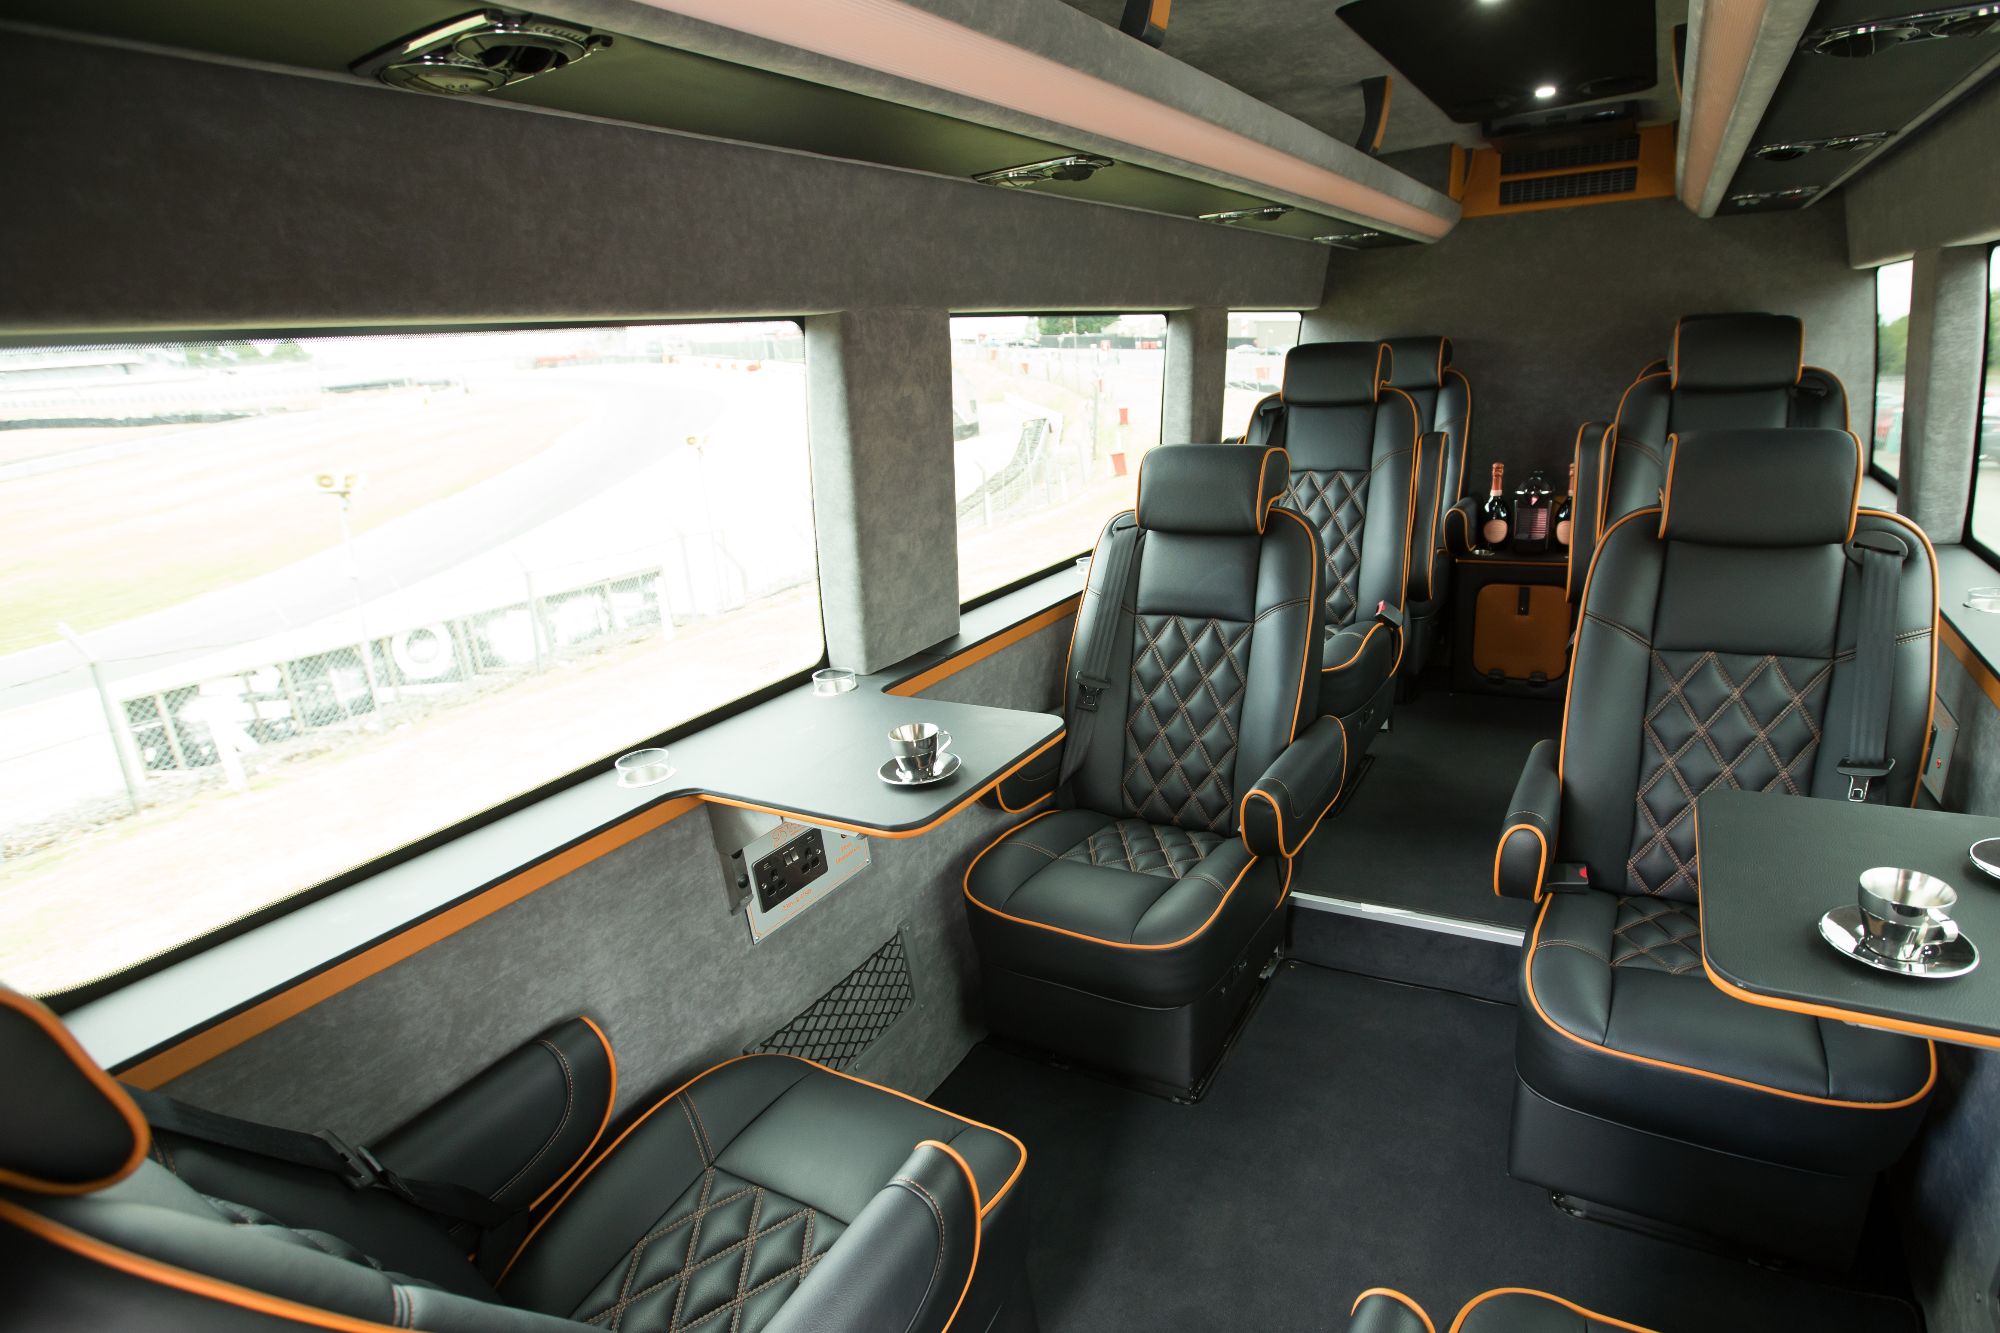 Image of the inside of a minibus showing Spradling vinyl on seats